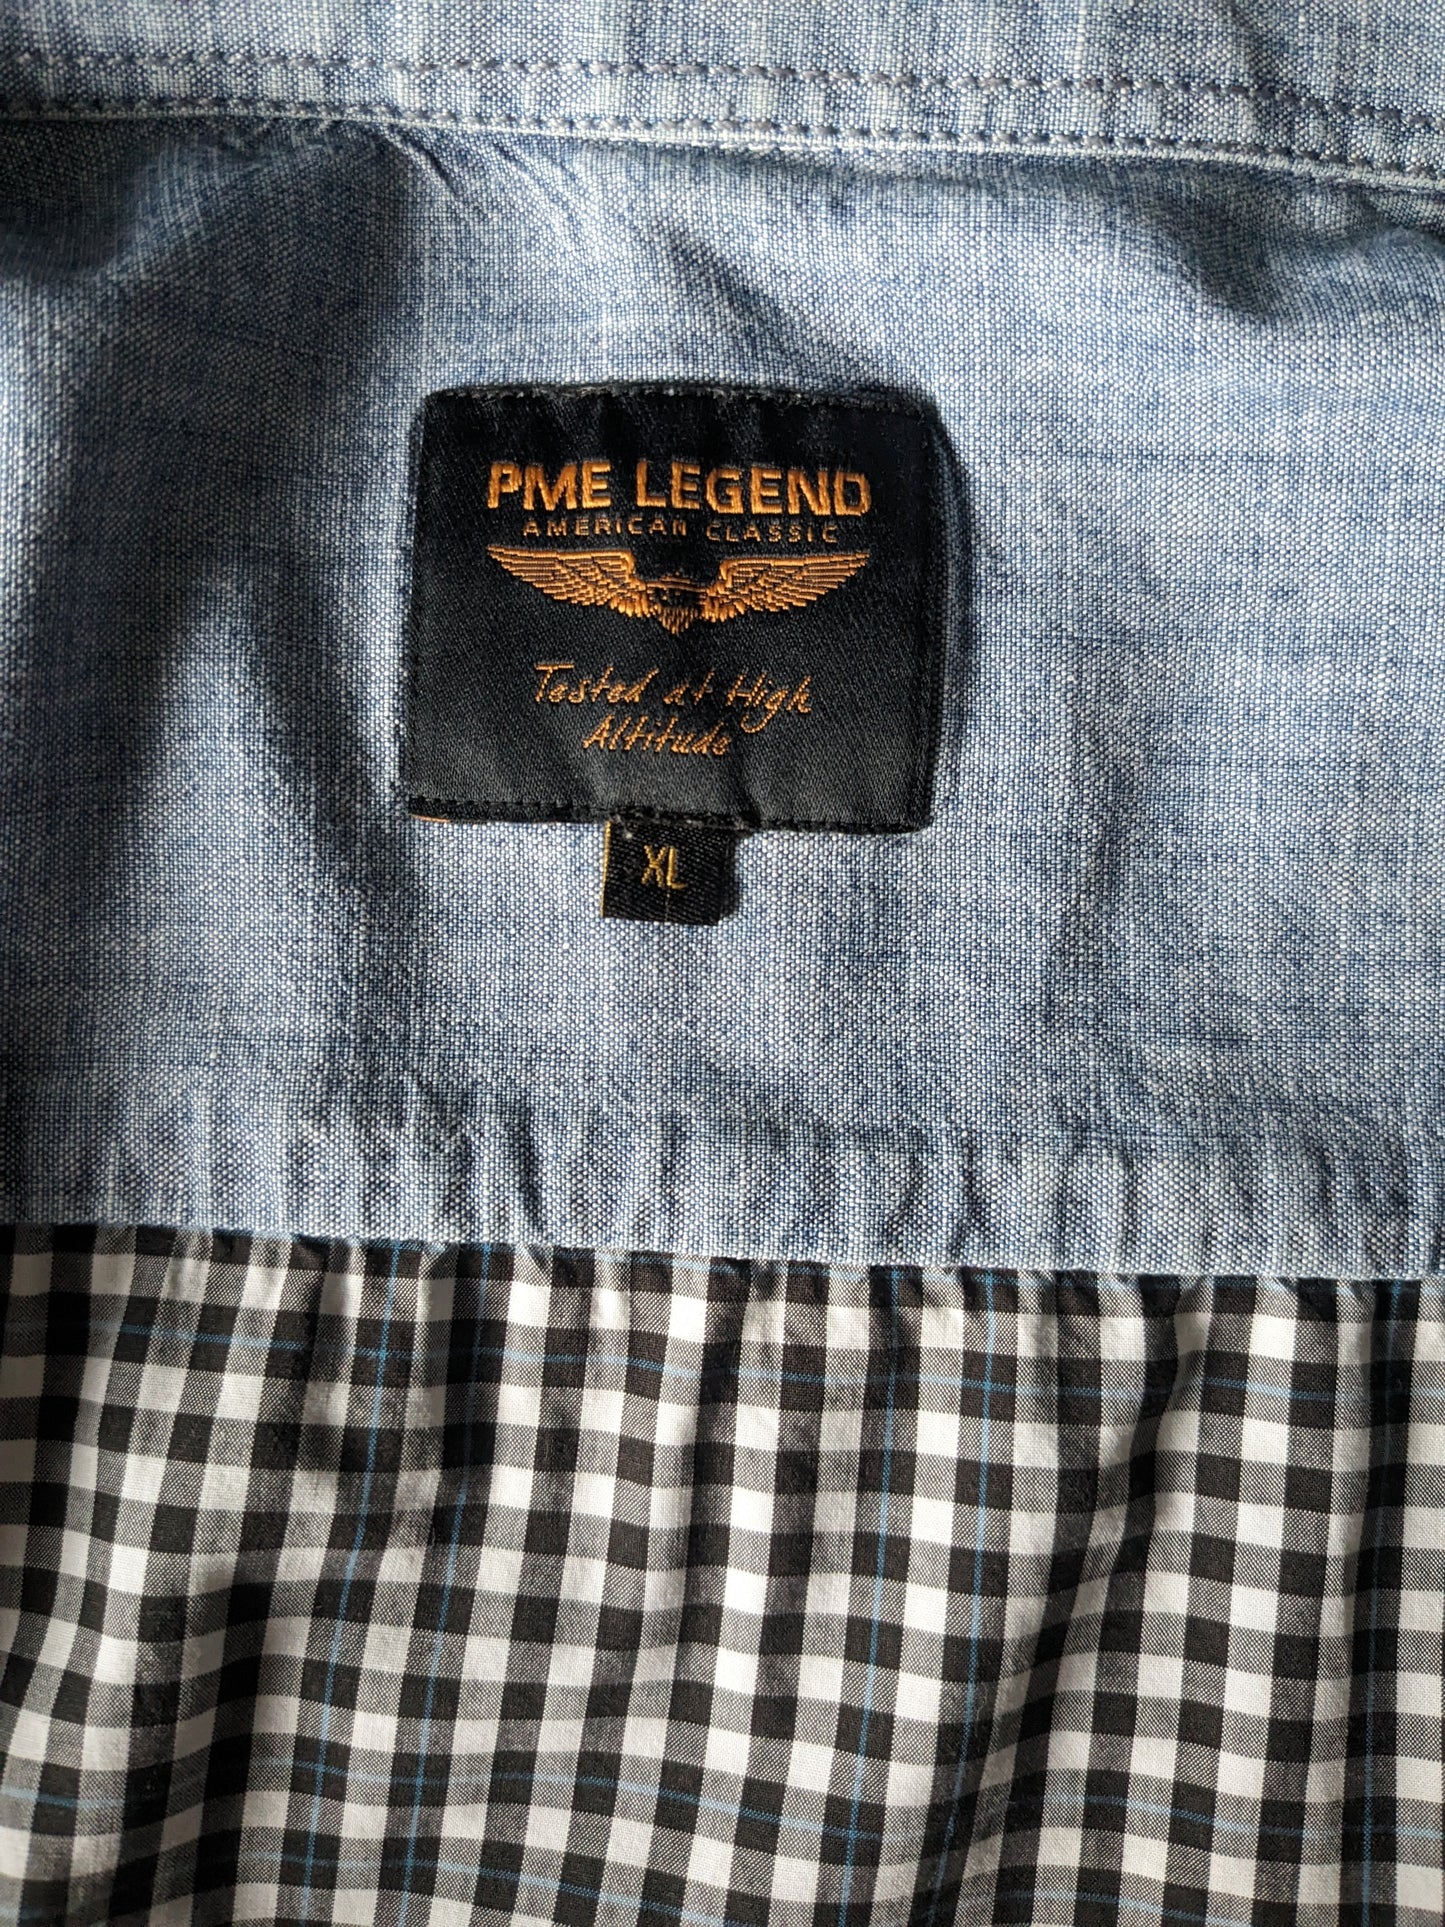 PME Legend shirt. Black and white blocked with blue line and stitching. Size XL.